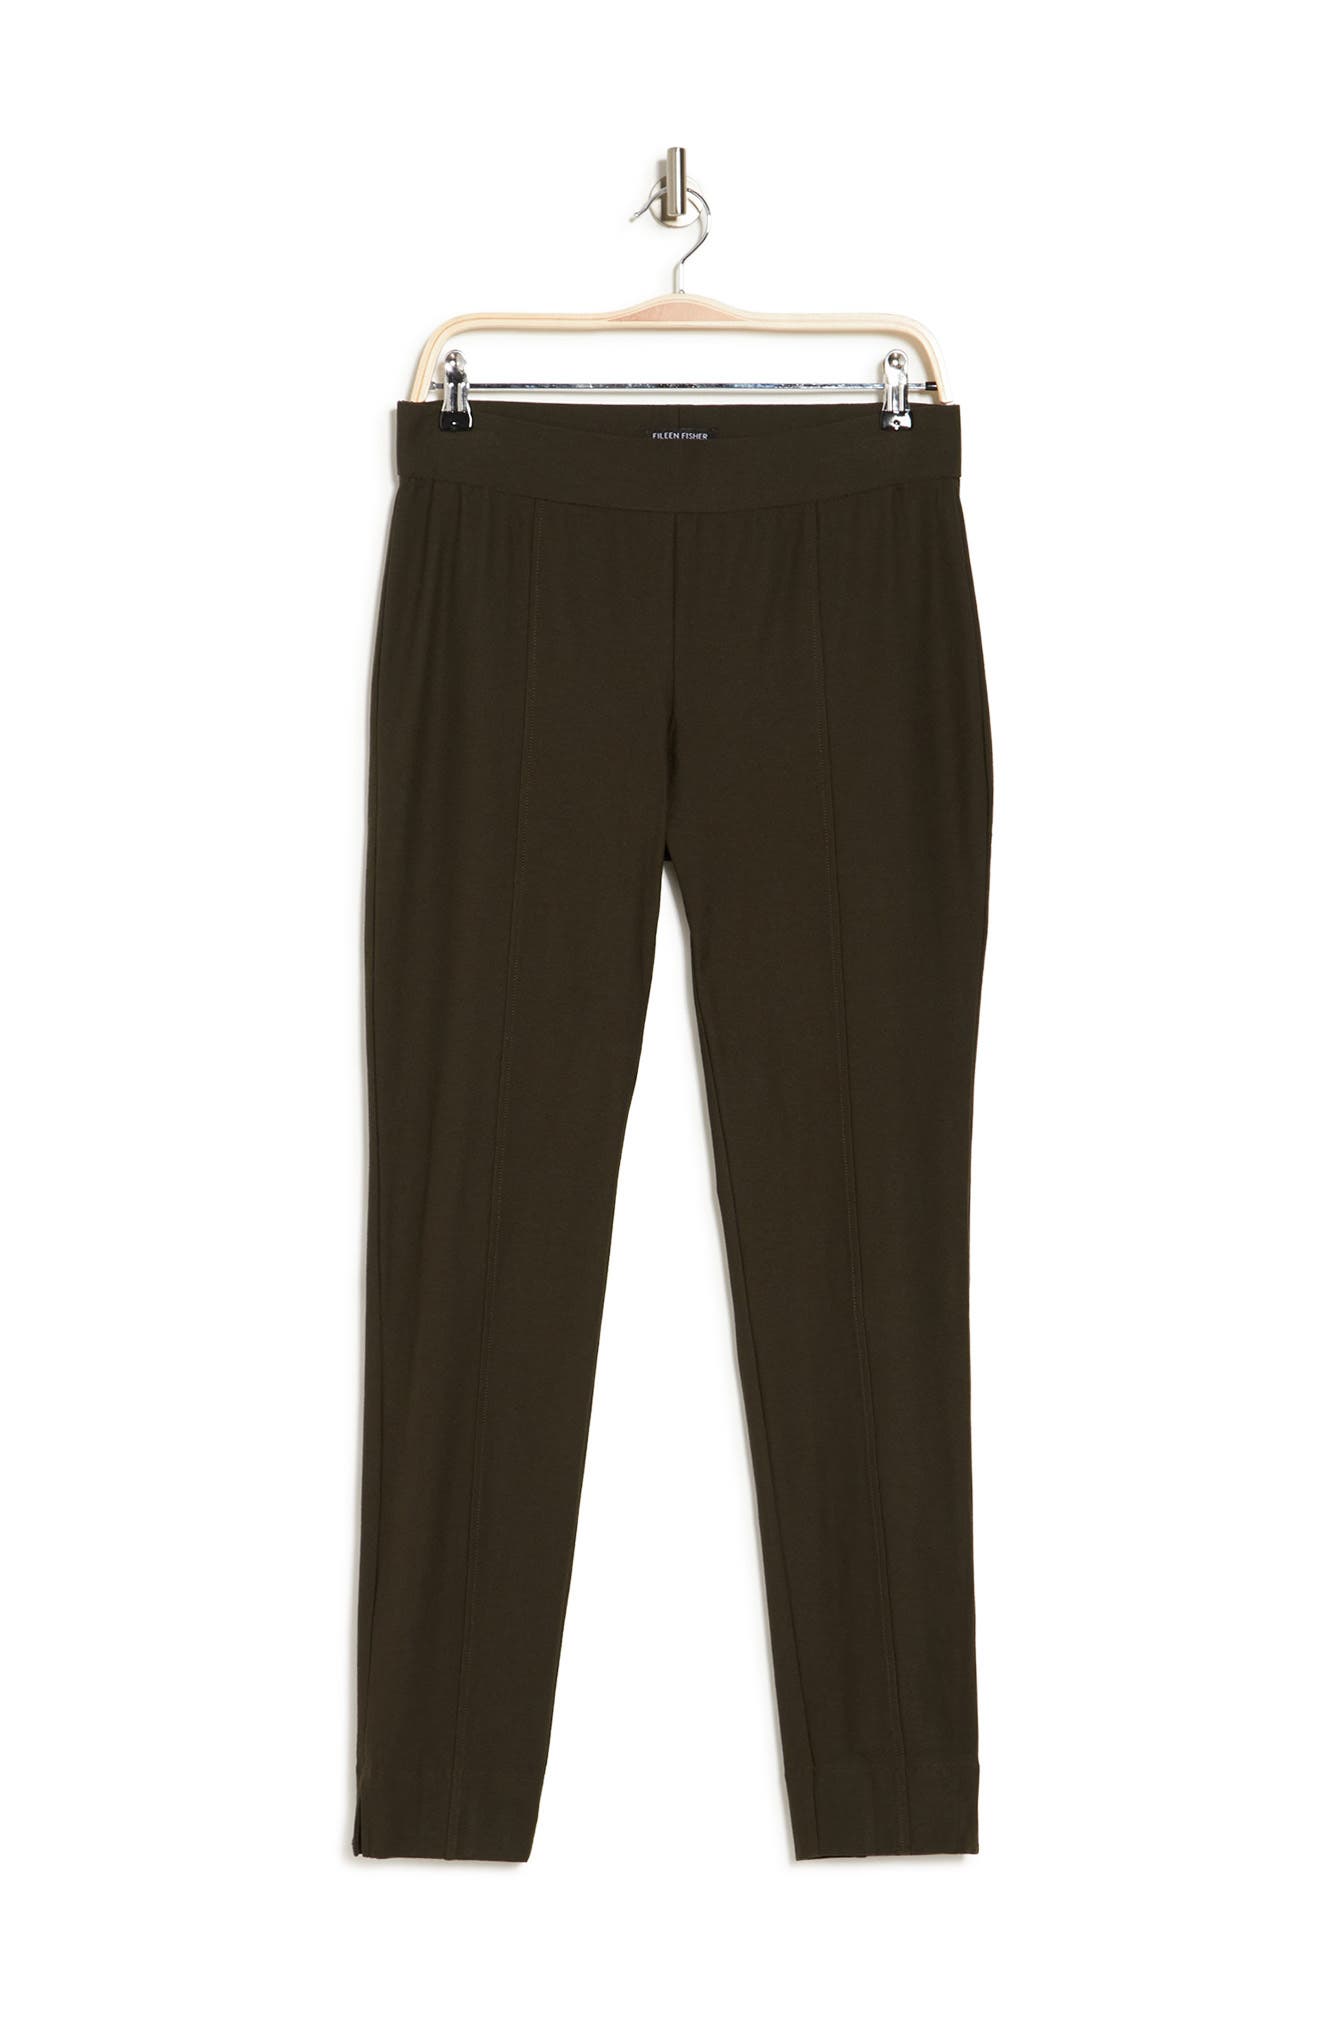 Eileen Fisher Stretch Crepe Pull-on Pants In Wdlnd